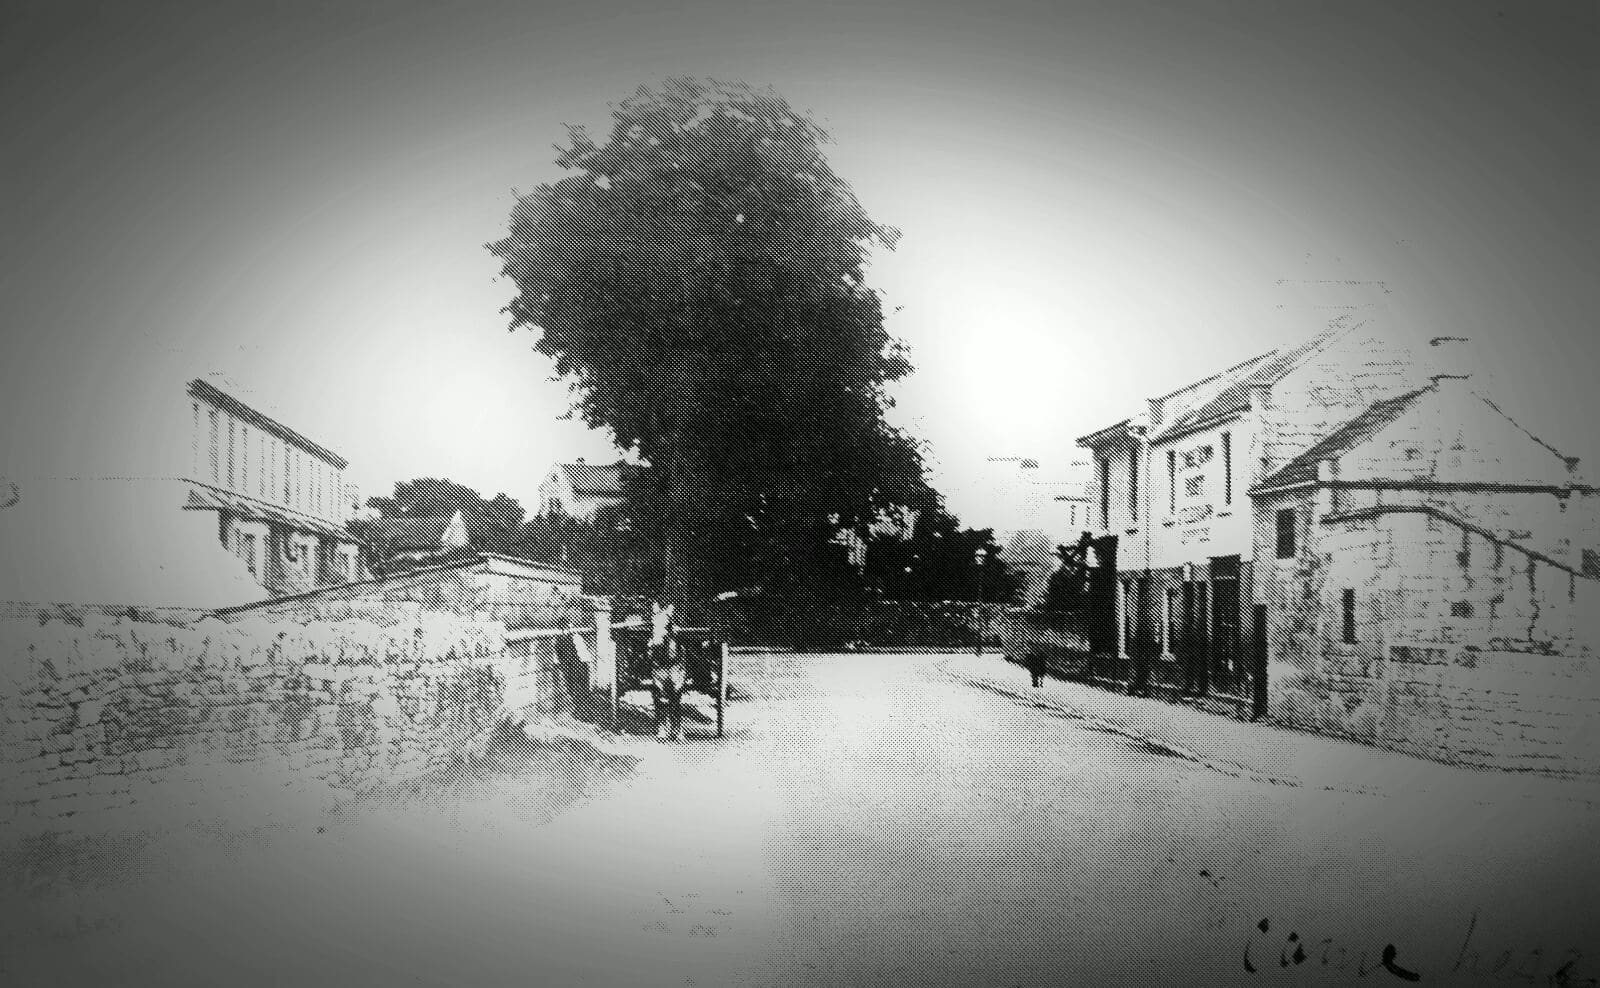 Combe Down Post Office early 1900s